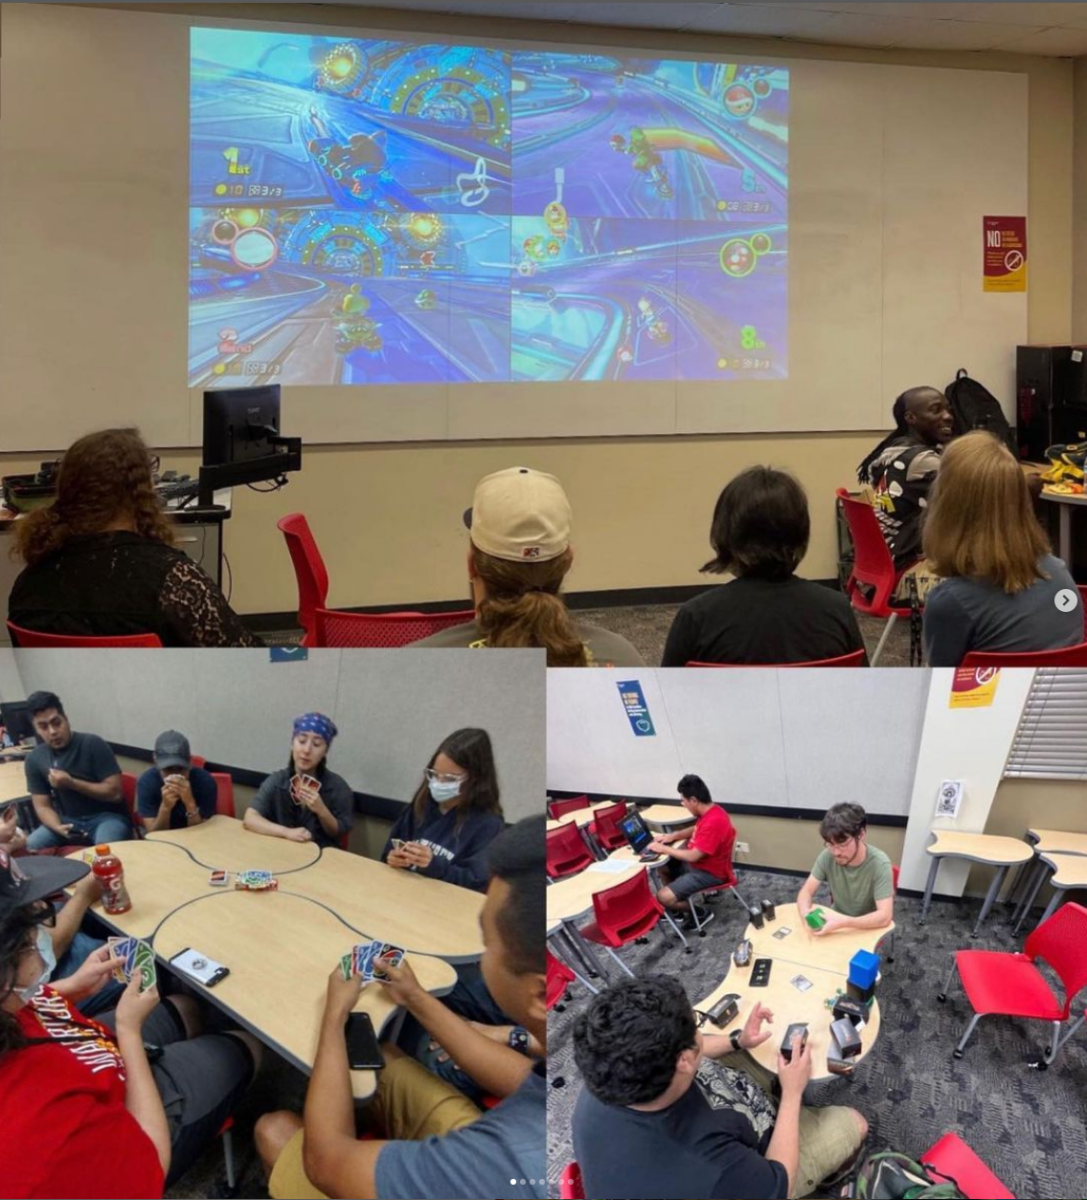 Different types of games being played, such as Mario Kart, Uno, and Magic: The Gathering, during an in-person meeting for Gaming Club. (Photo Courtesy of @stanstategaming on Instagram)